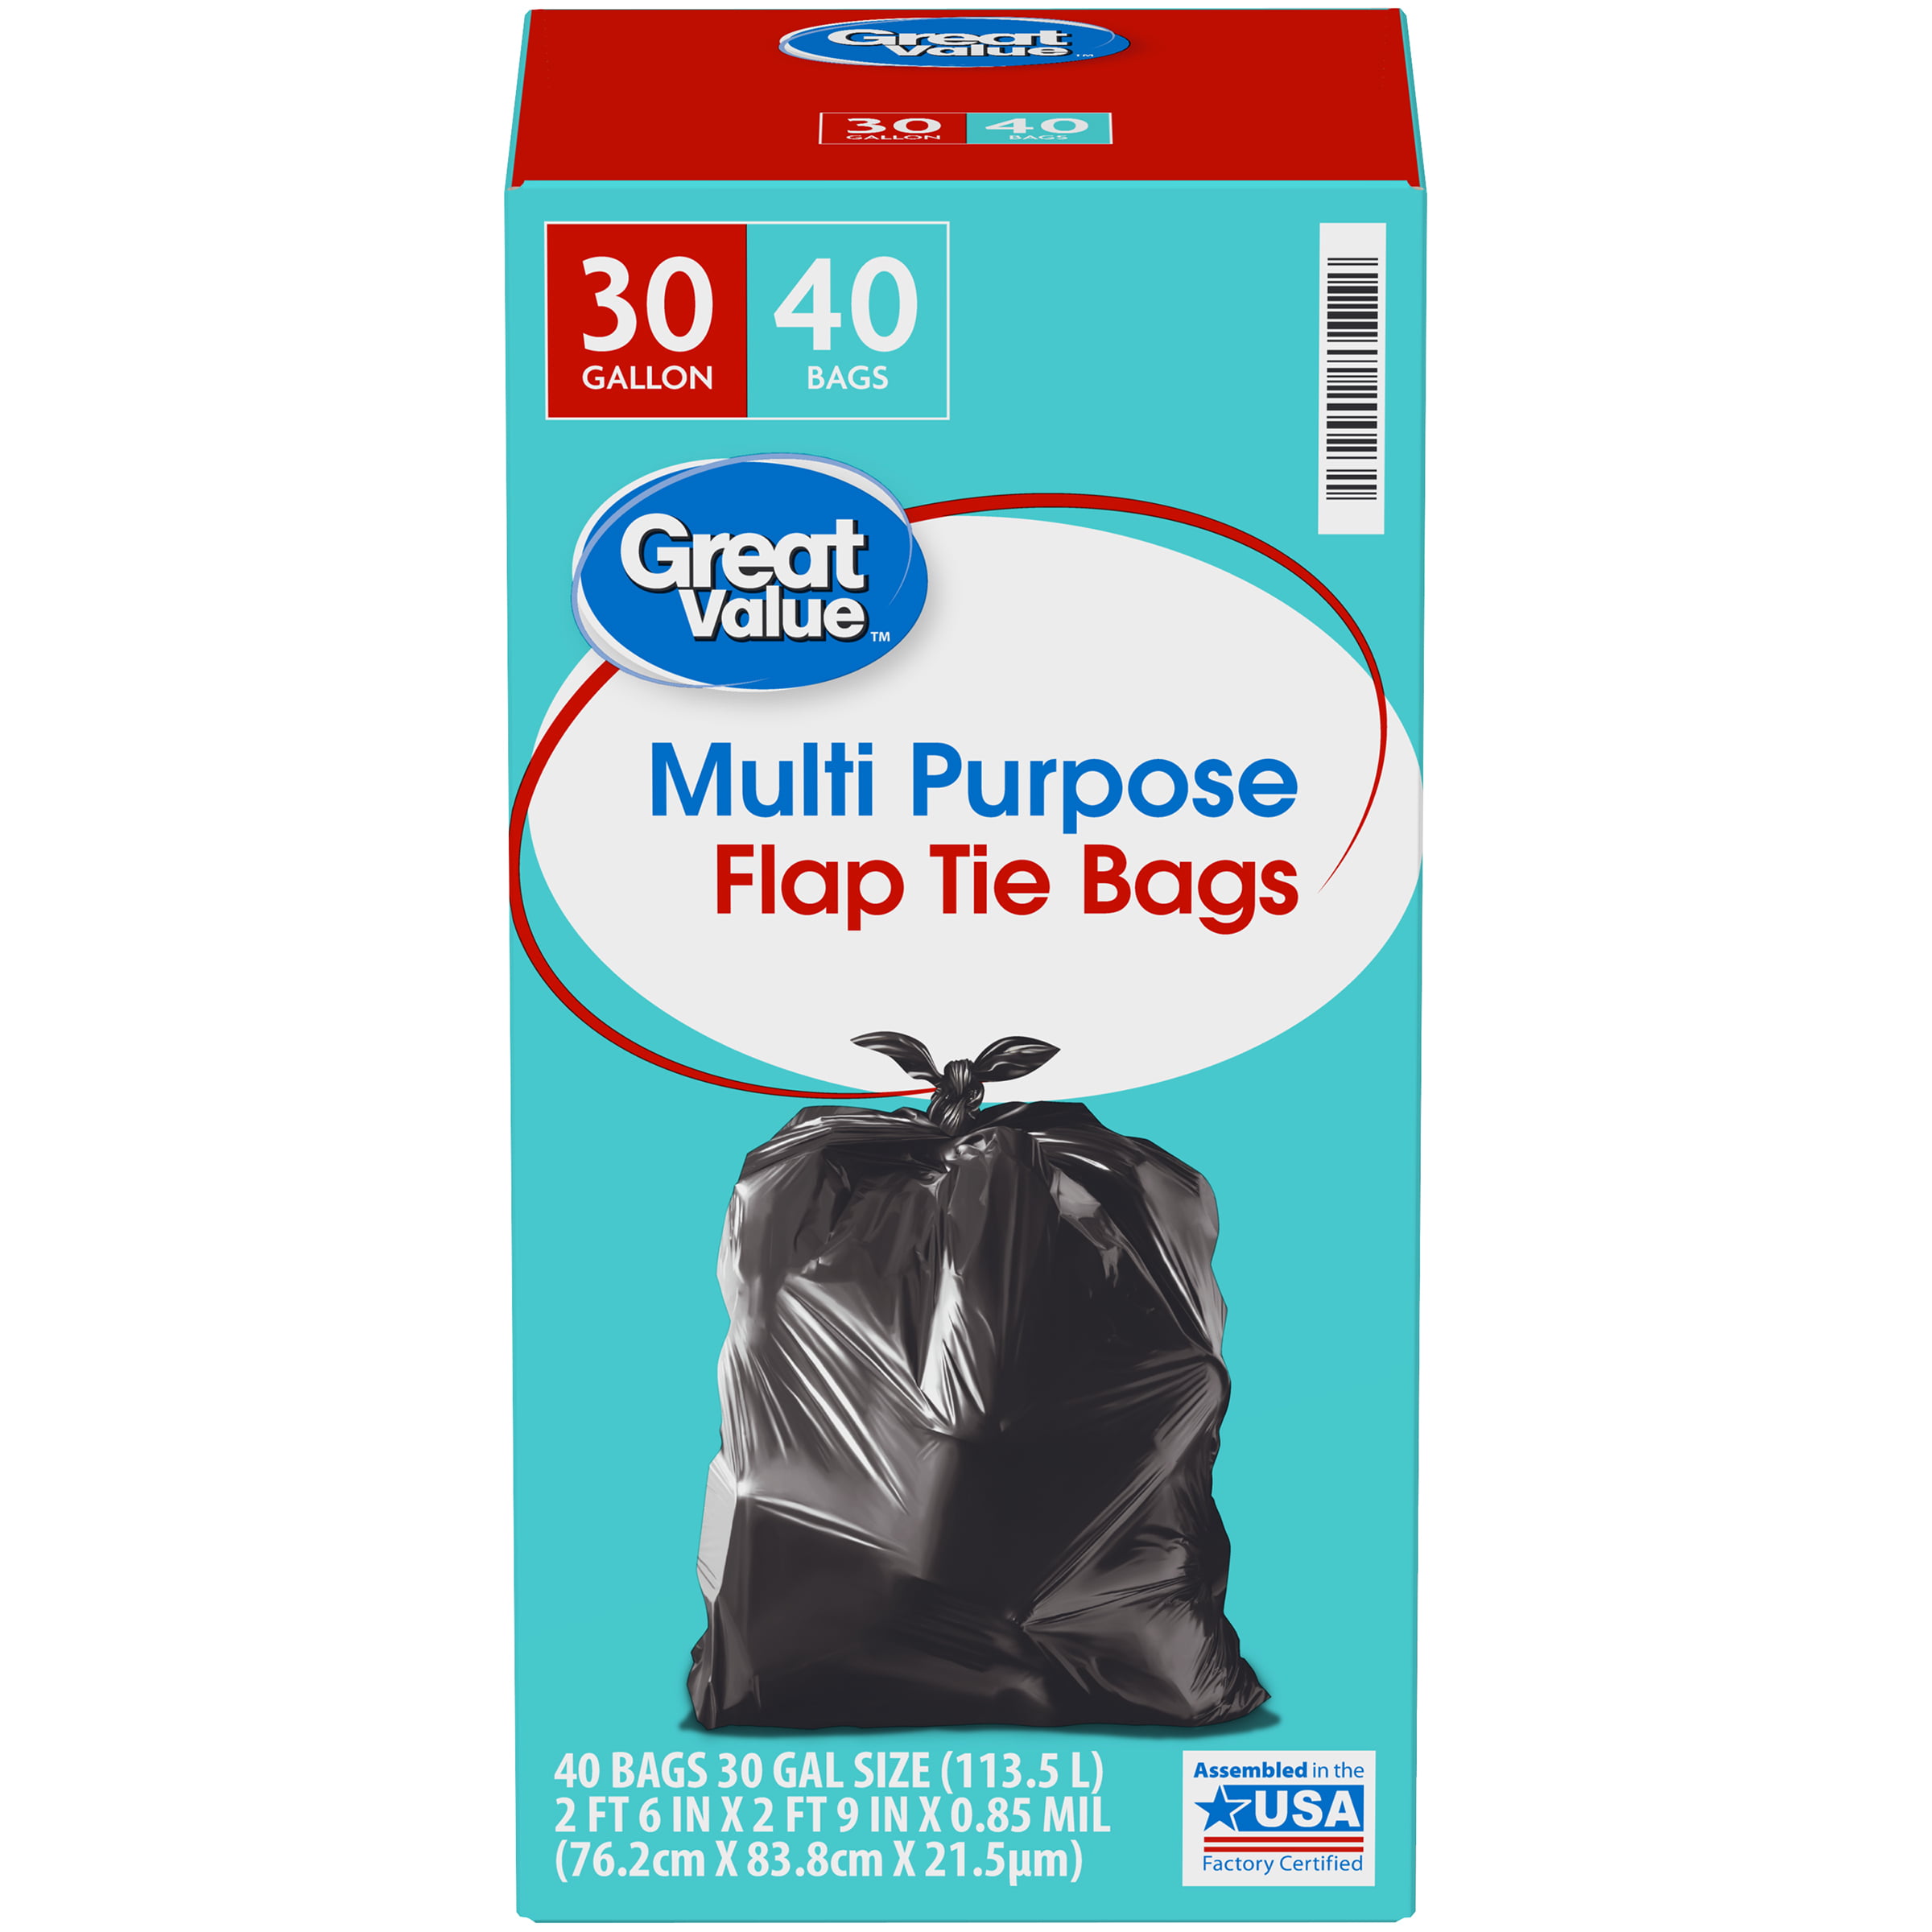 Life Goods 4 Flap Tie Trash Bags 30 Gallon - 10 CT 12 Pack